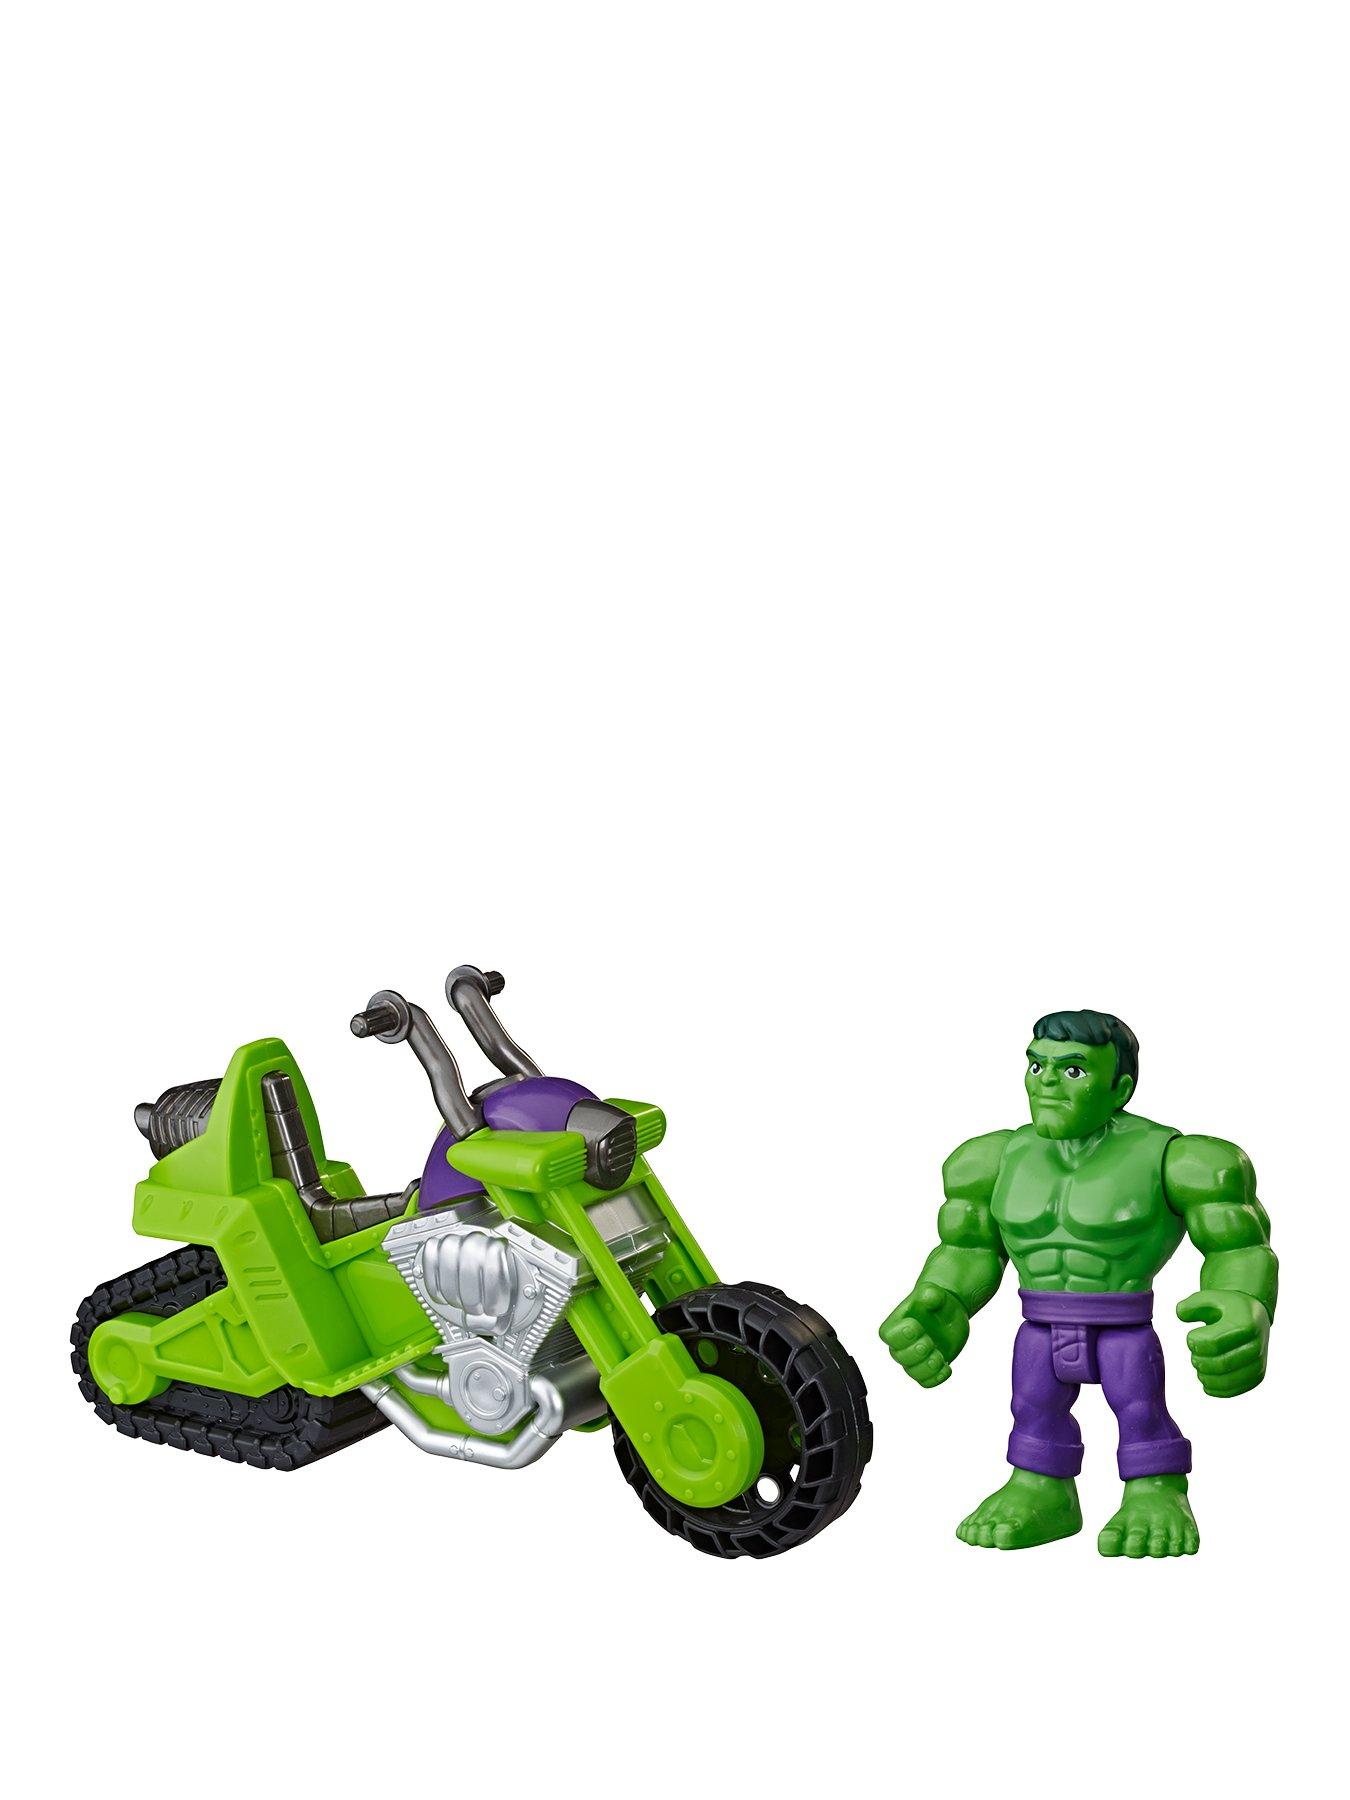 Action Figures Action Toys Playsets Very Co Uk - 22 best roblox images action figures toys toys uk